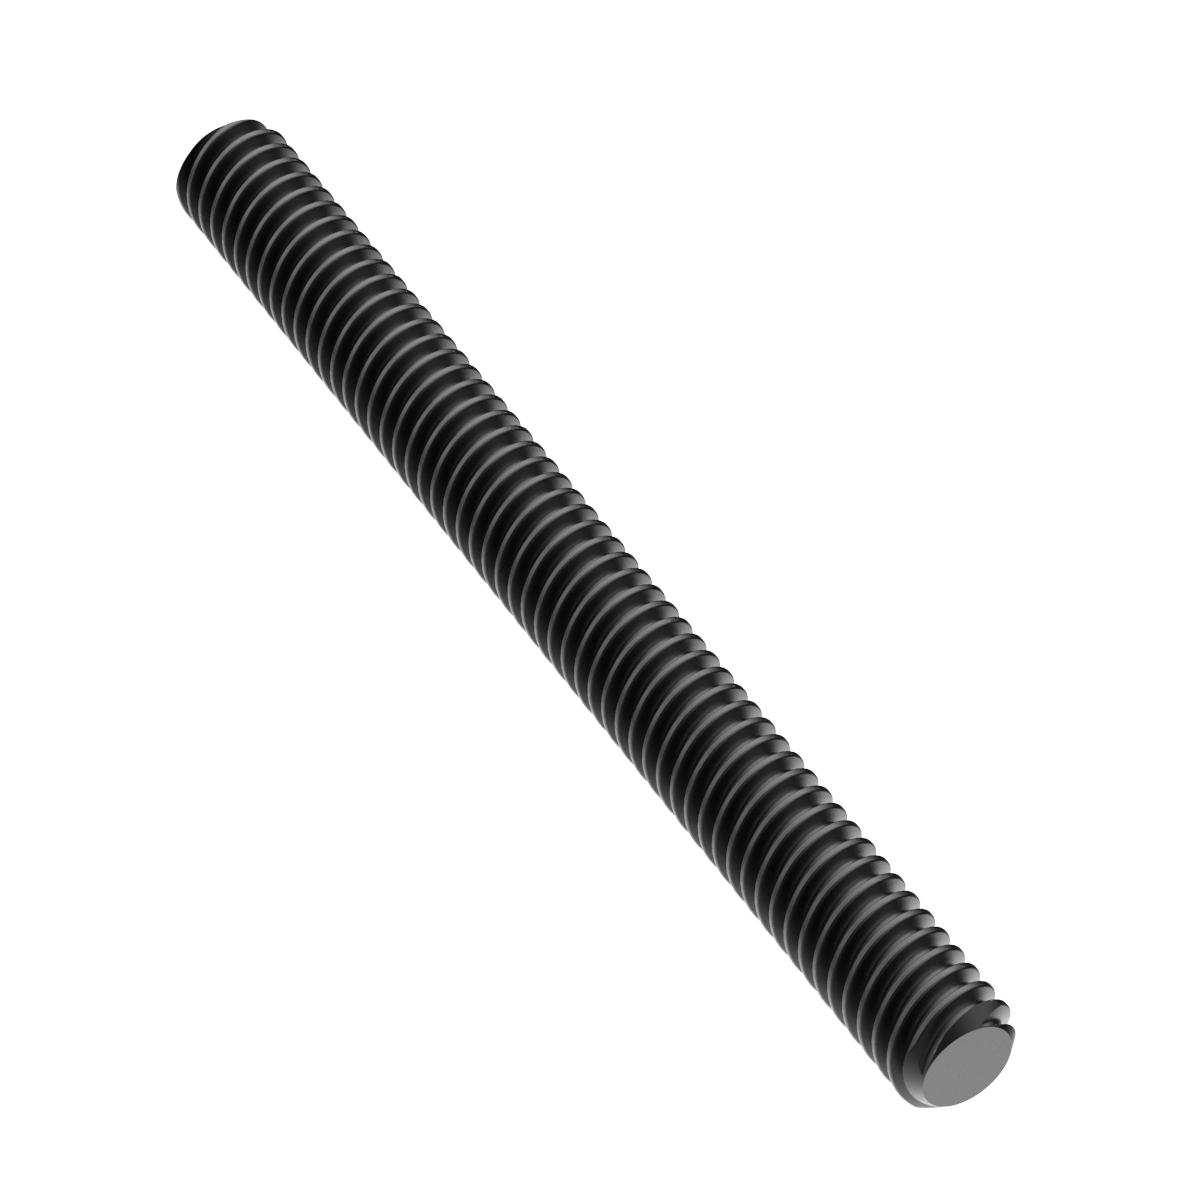 LDO Ender 3 / Ender 5 Z Axis Threaded PTFE Coated Lead Screw with POM Anti Blacklash Nut